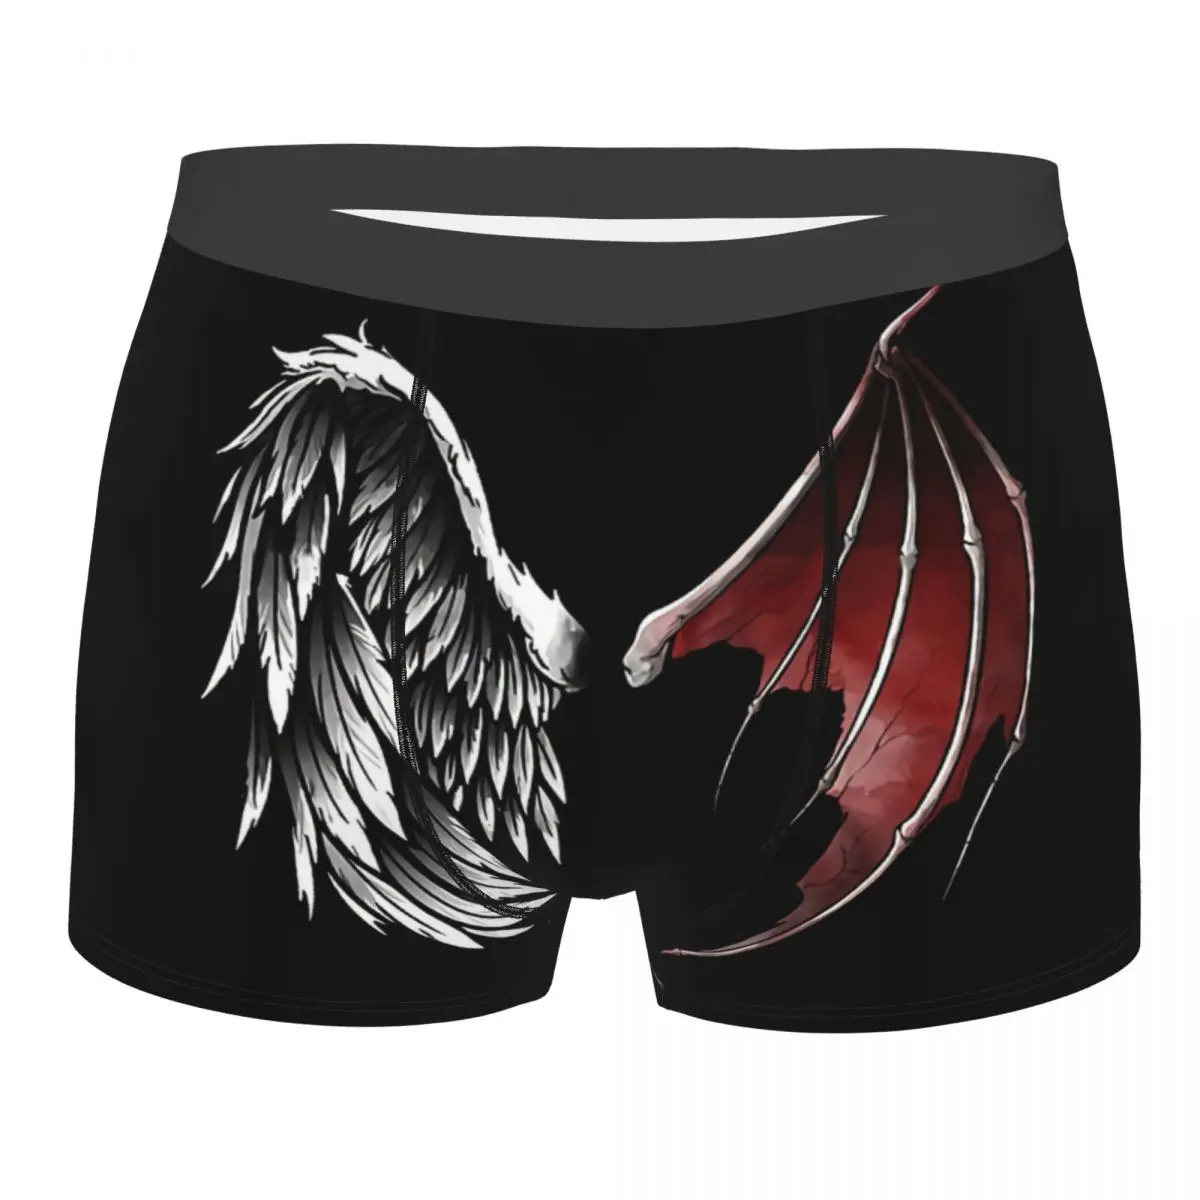 

Lucifer Wings Man's Boxer Briefs Underpants Baphomet Highly Breathable High Quality Sexy Shorts Gift Idea